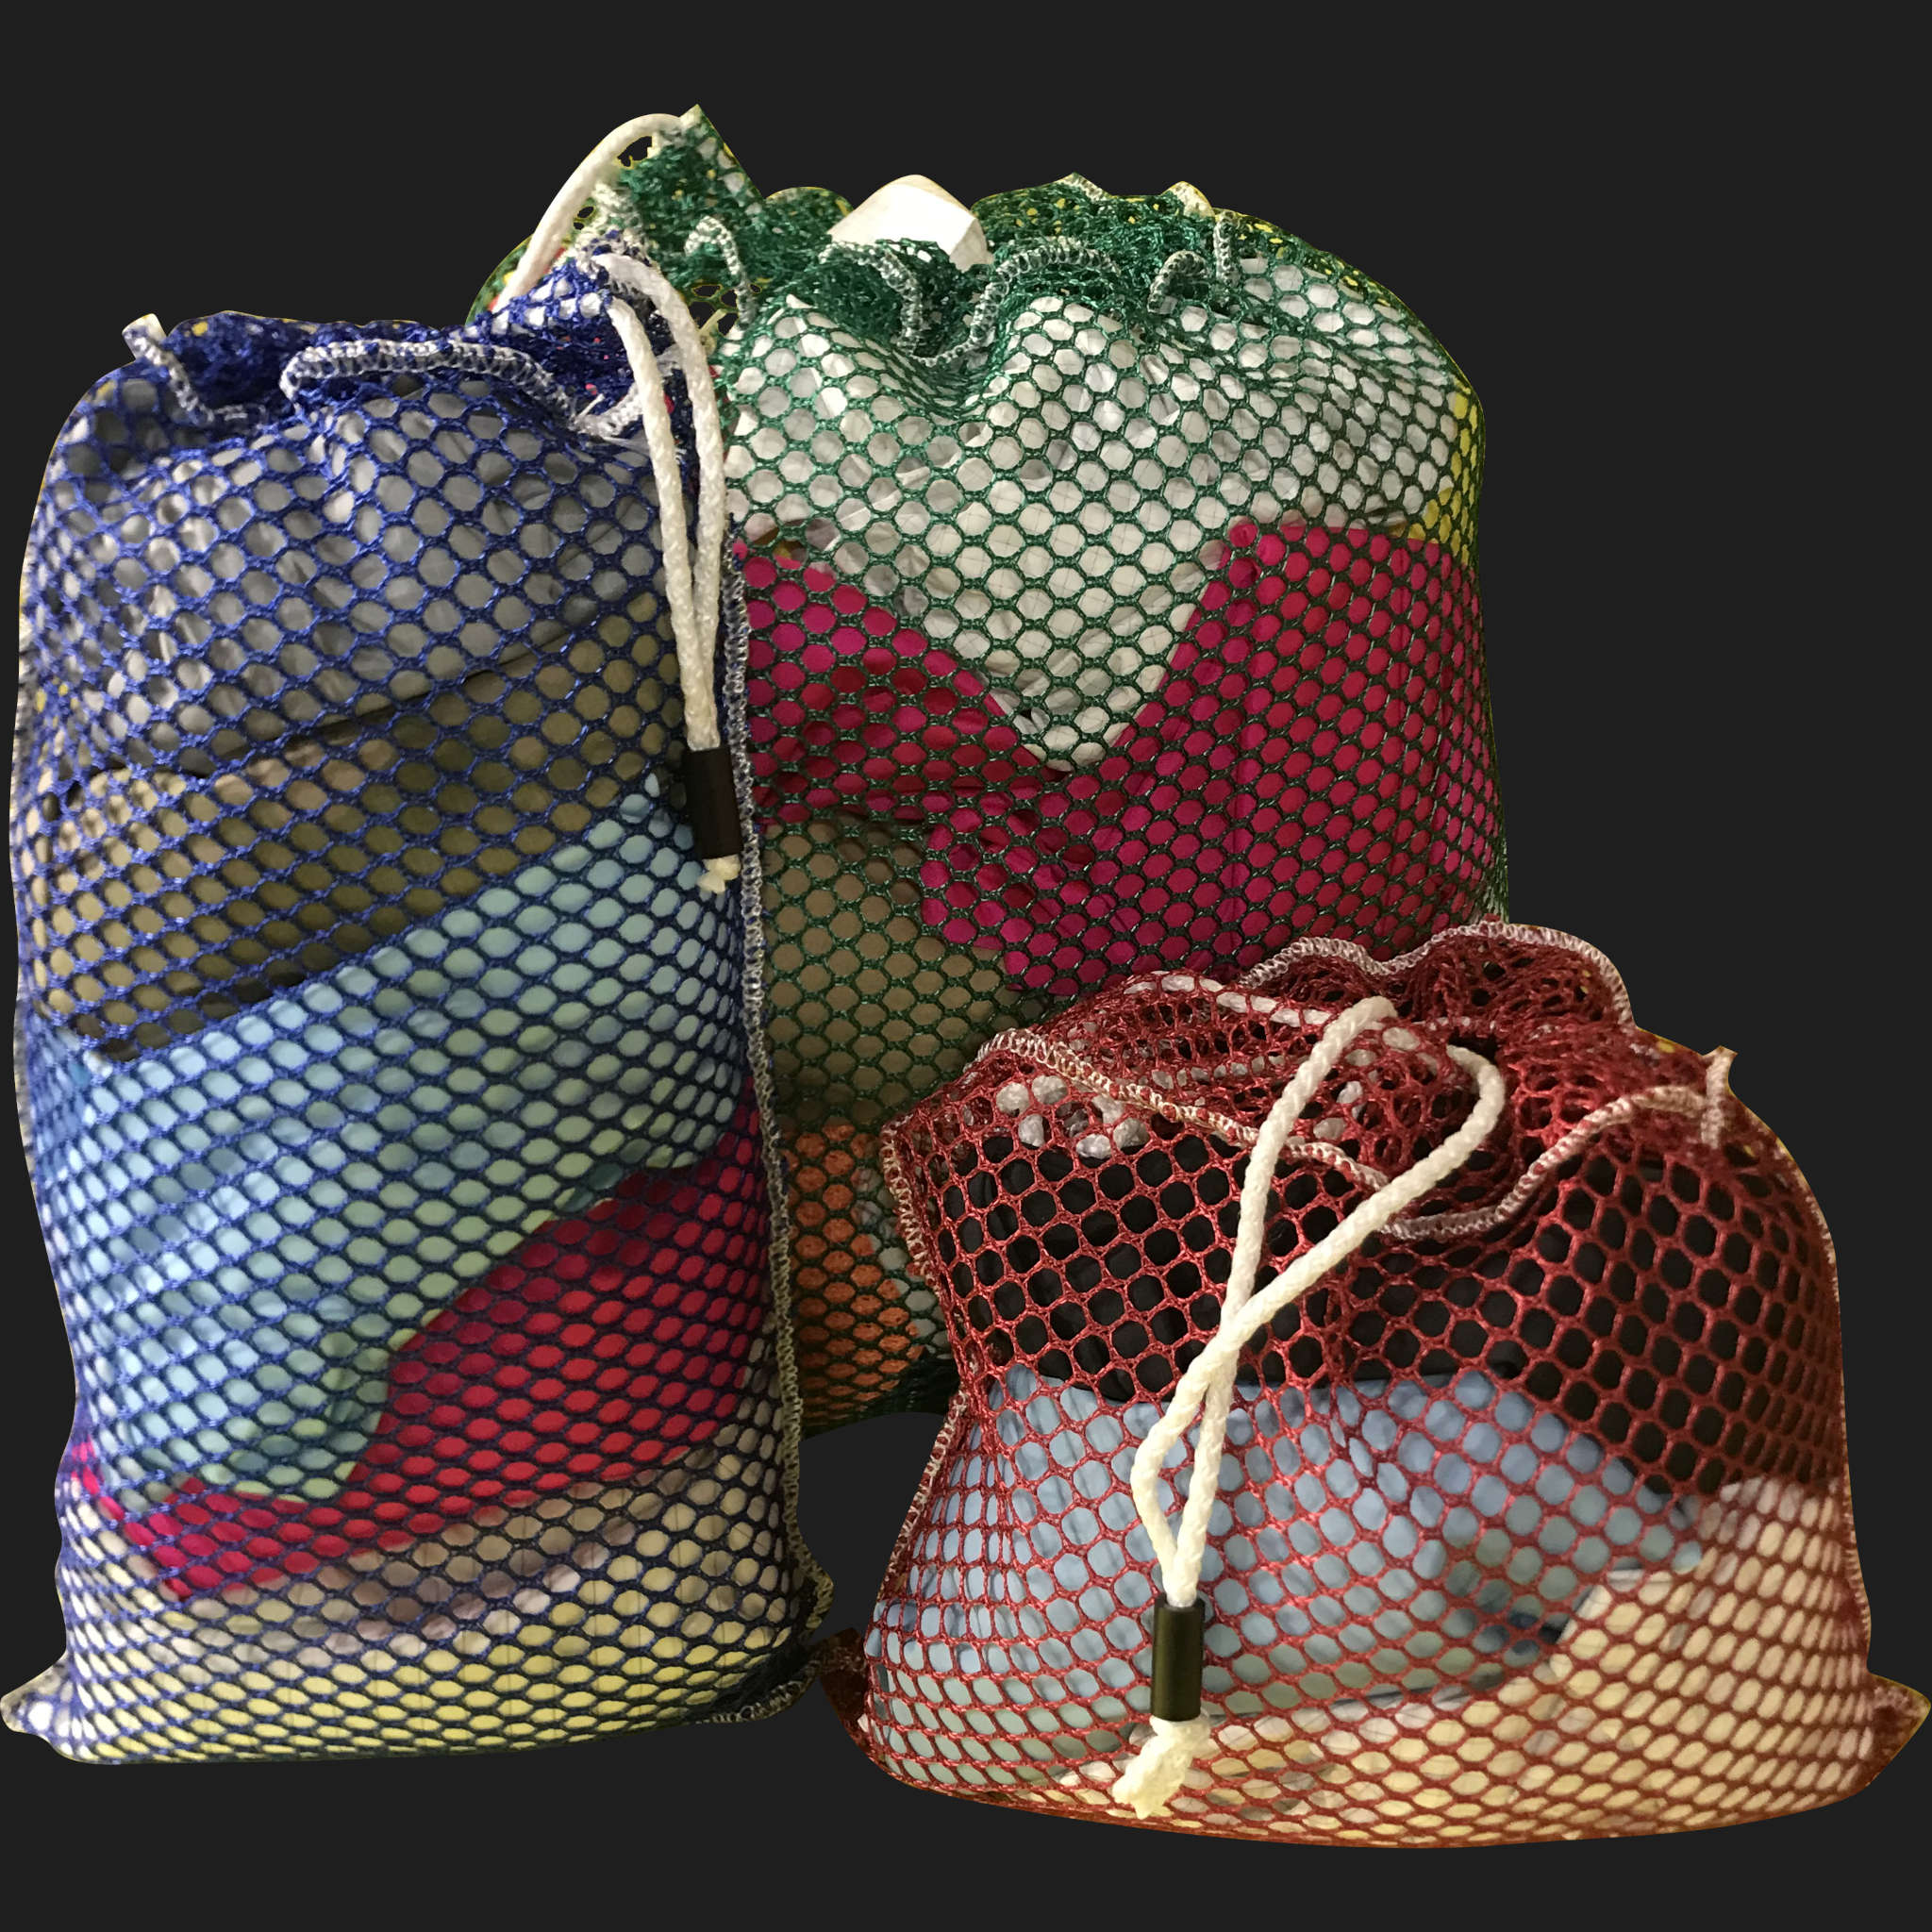 44" x 64" Customized Mesh-Net-Laundry Bags Heavy Duty with Cord and barrellock closure